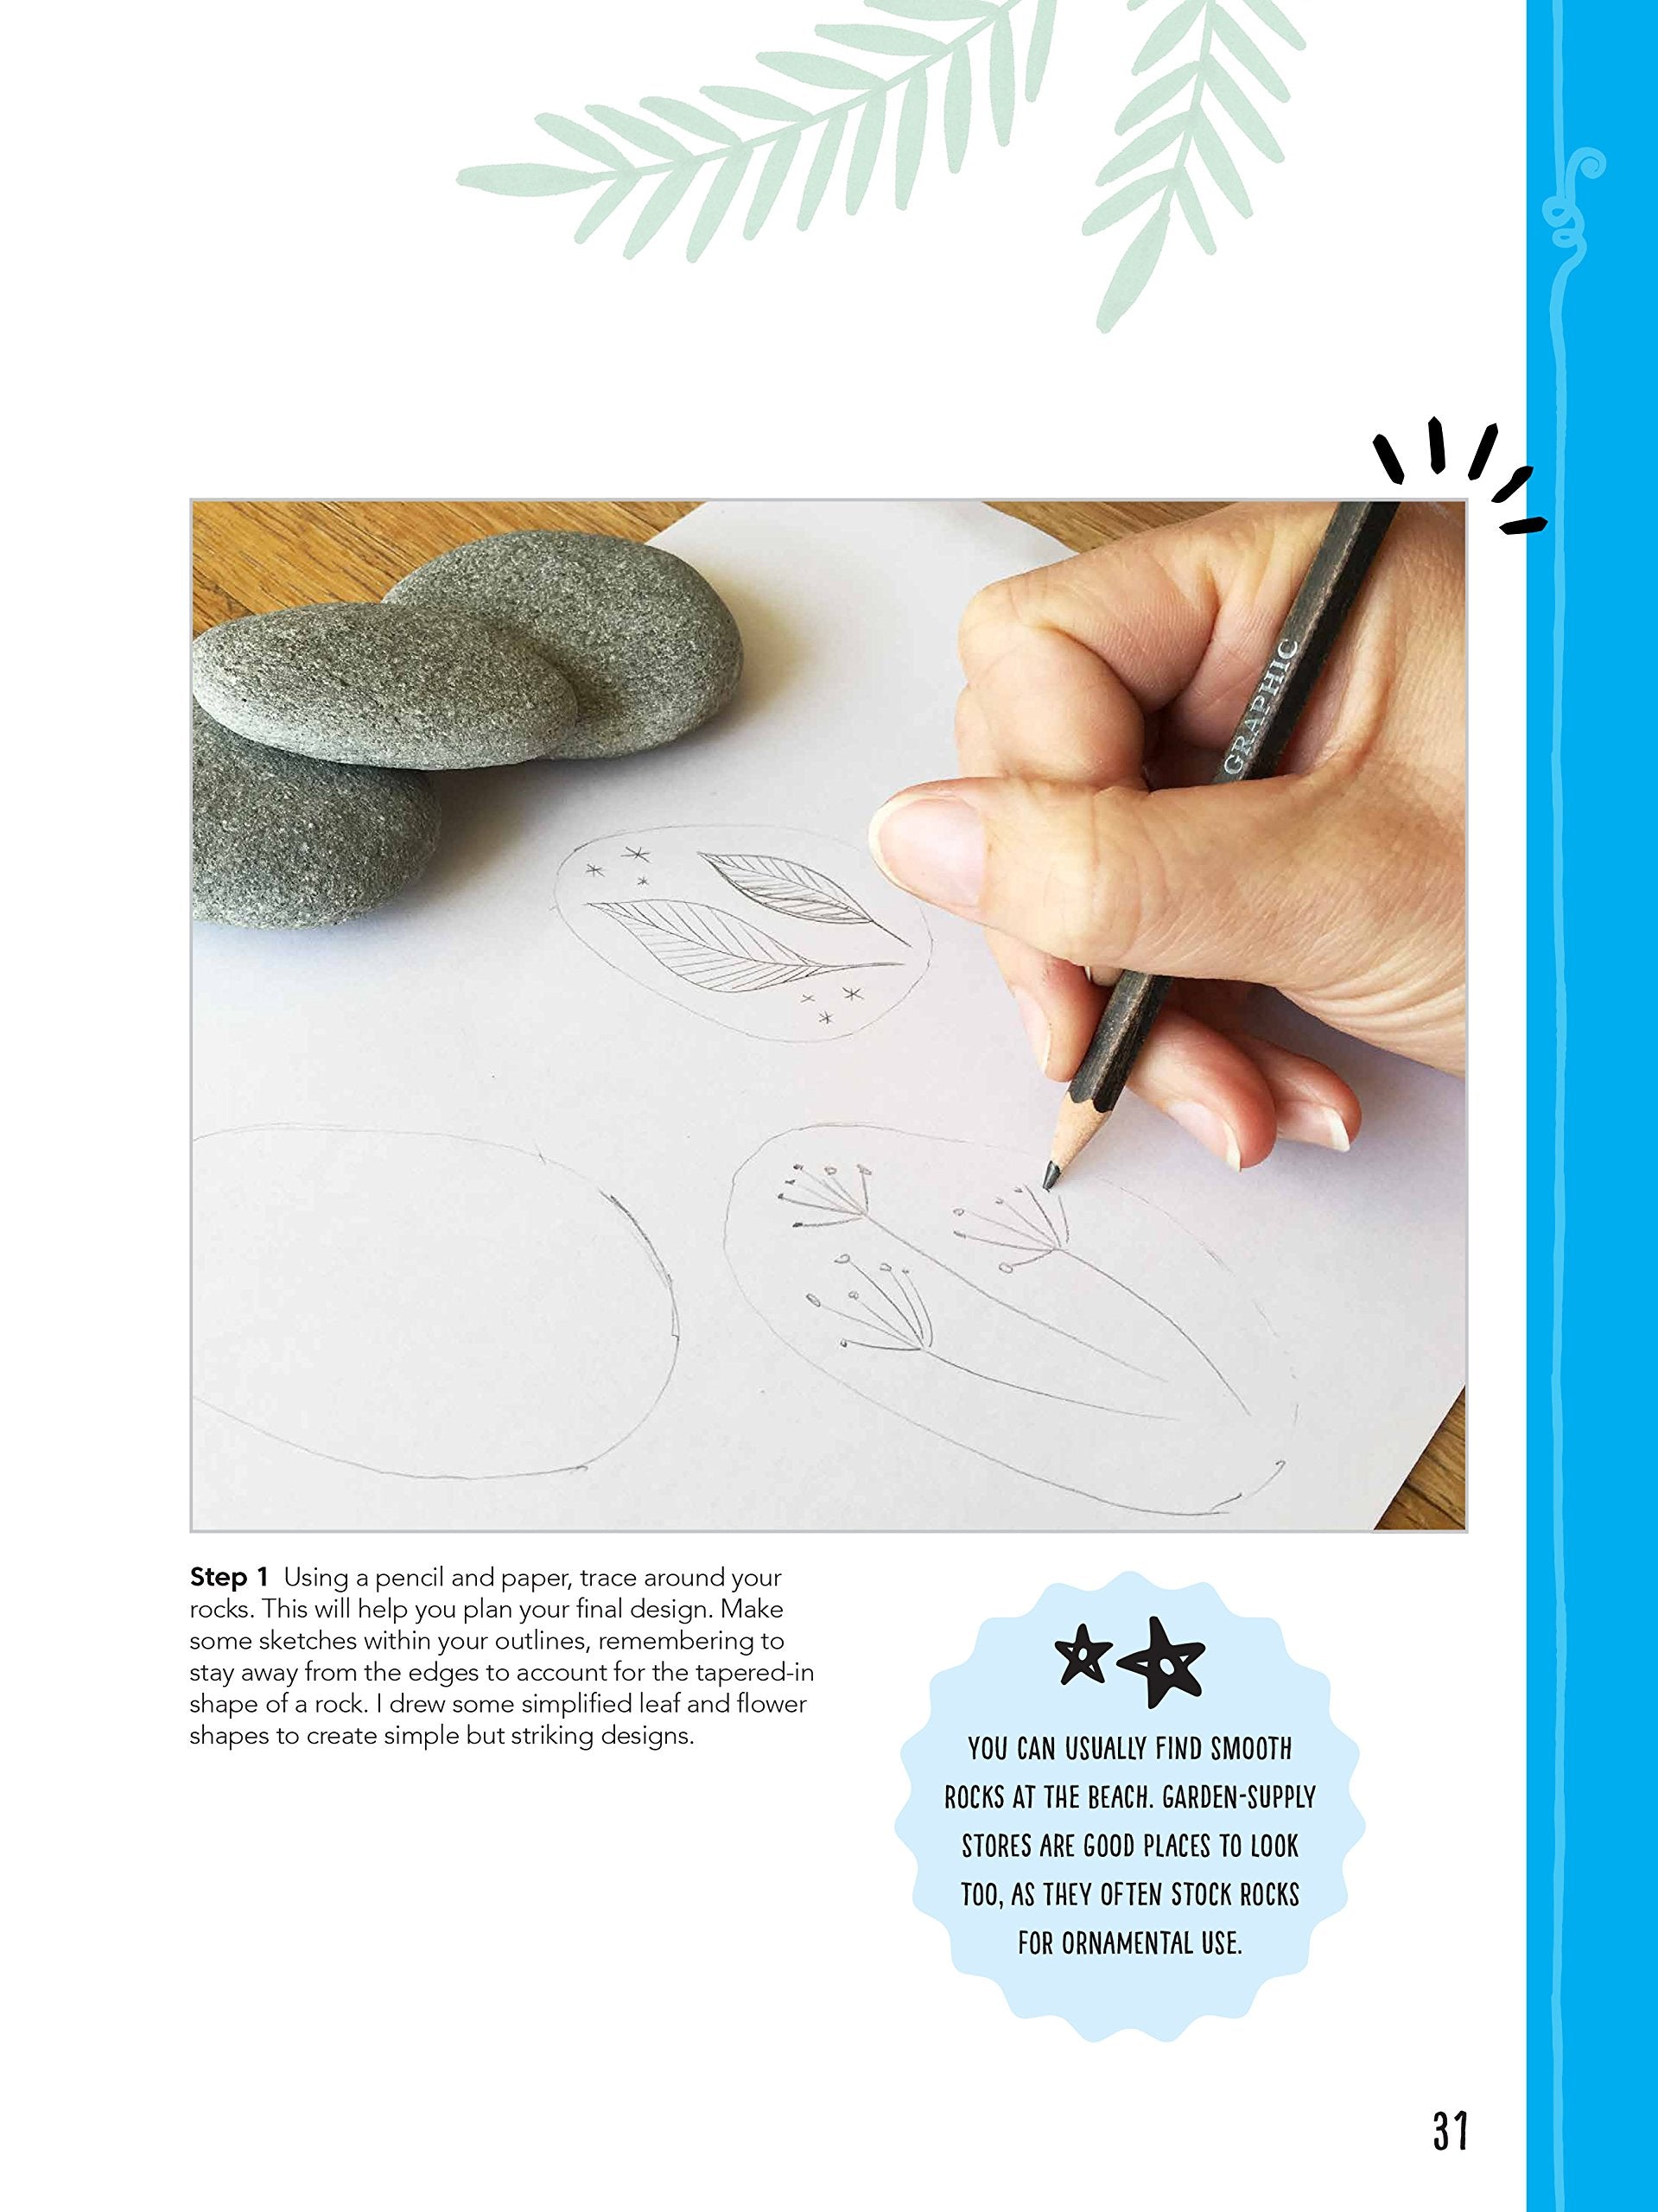 Creative Marker Art And Beyond - Art Techniques Book - The